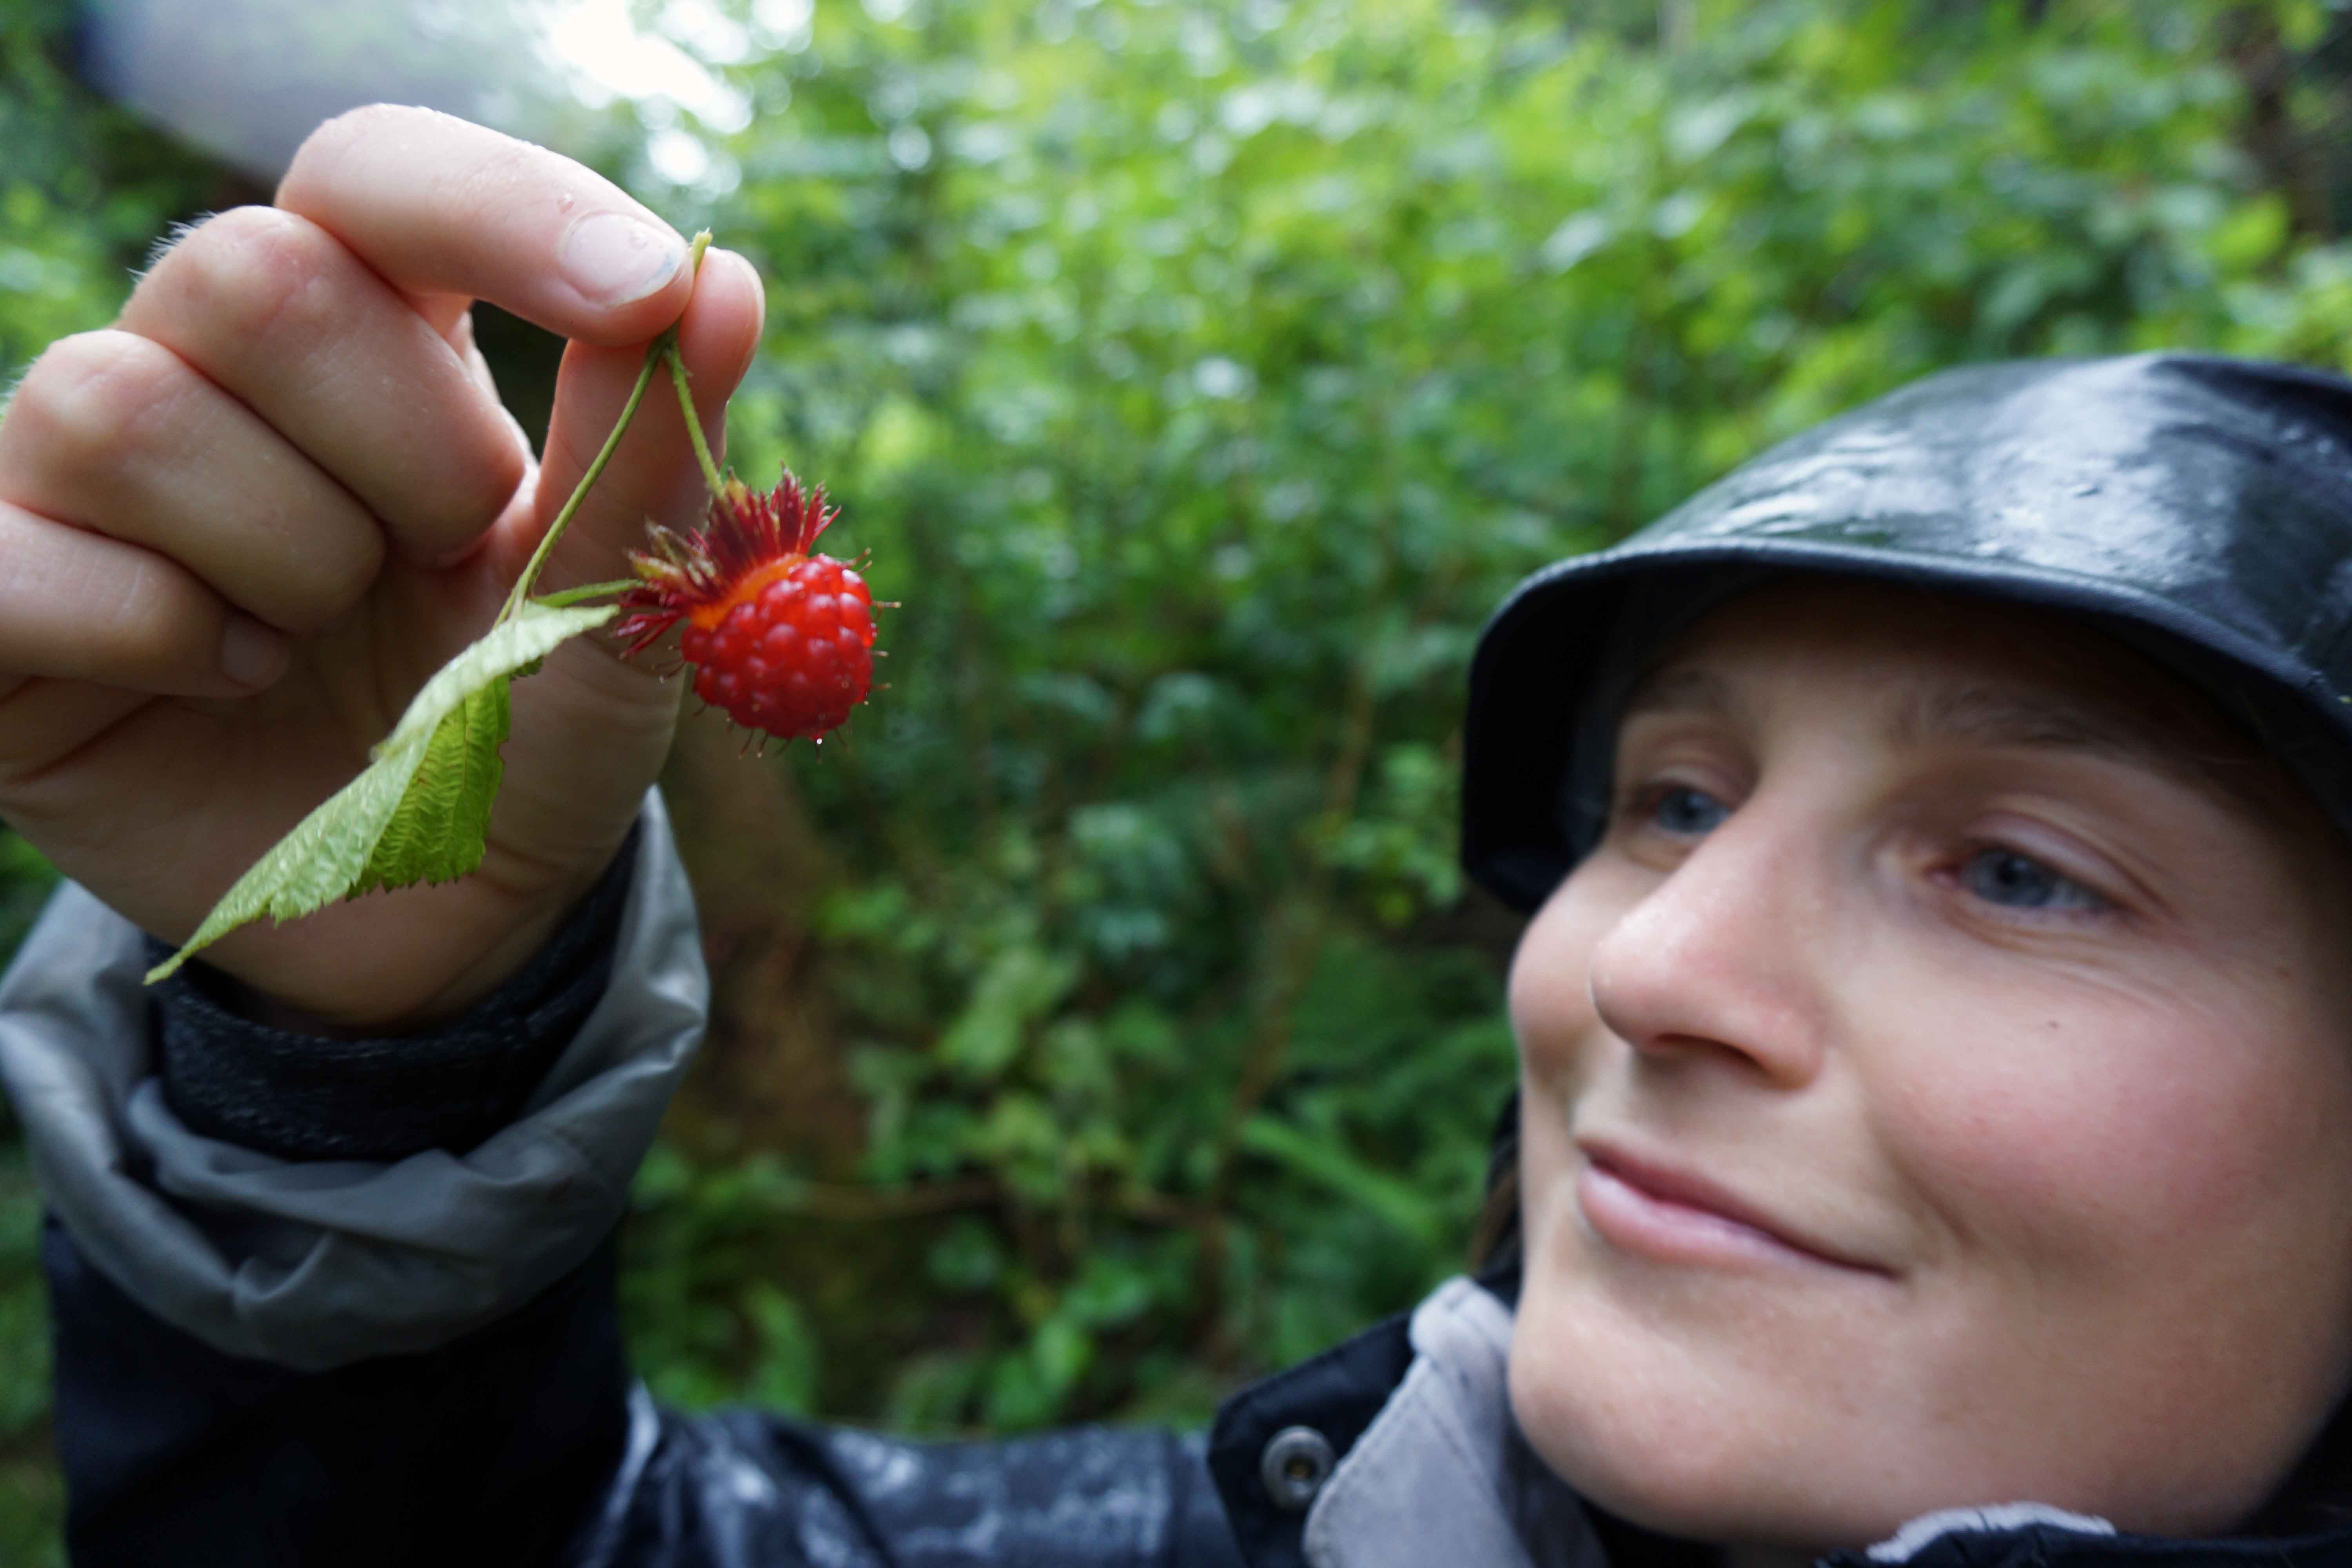 Woman holds up freshly picked berry